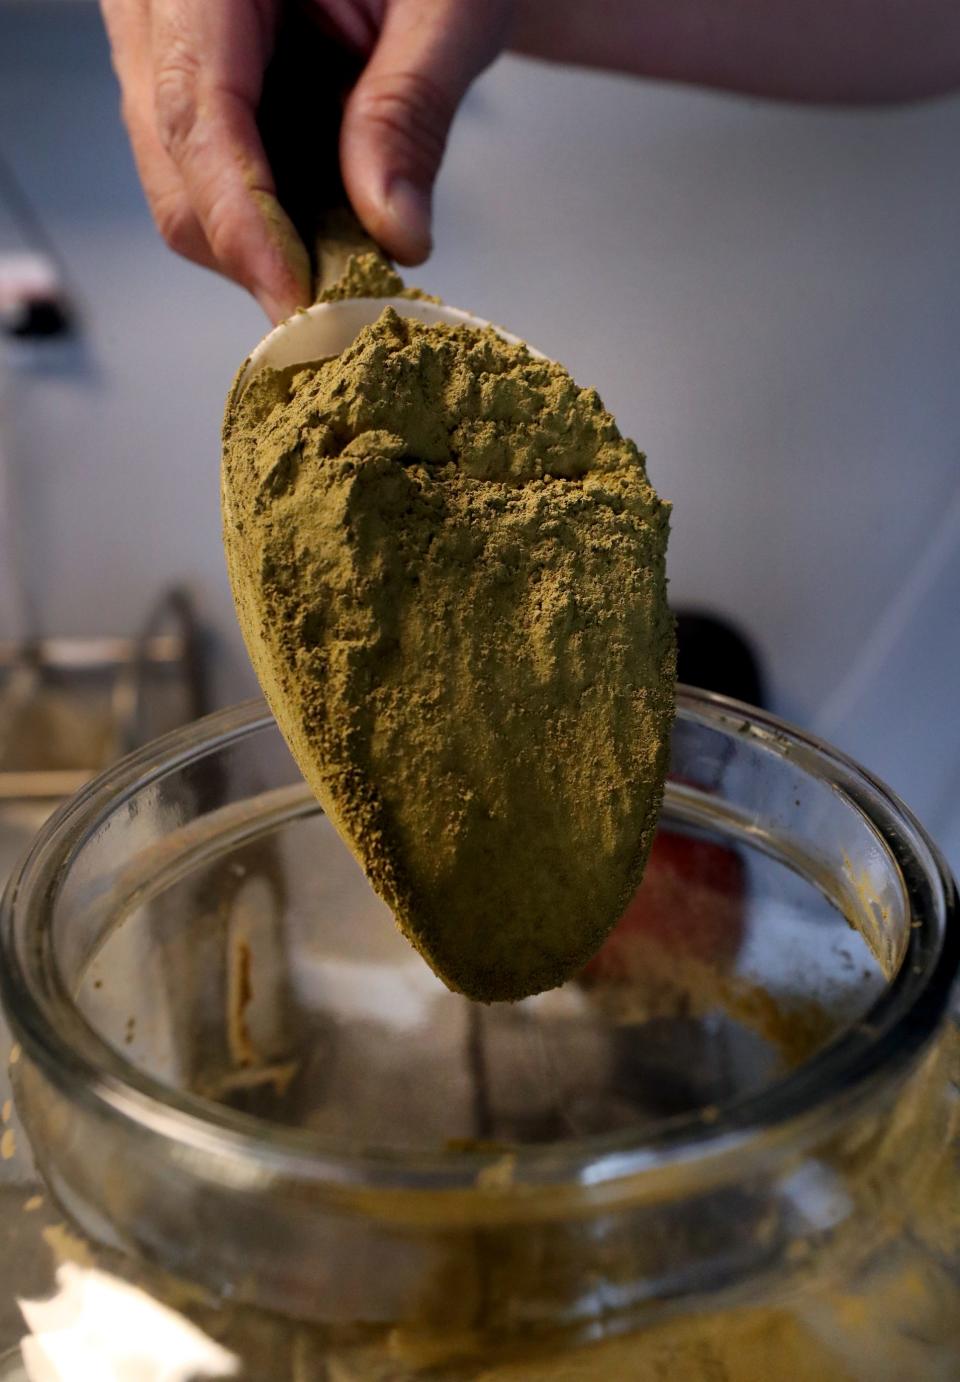 Kratom is a naturally occurring herbal extract that comes from leaves of an evergreen grown in Southeast Asia. It can be chewed as well as swallowed in gel cap form, or brewed as a tea or mixed in another liquid.